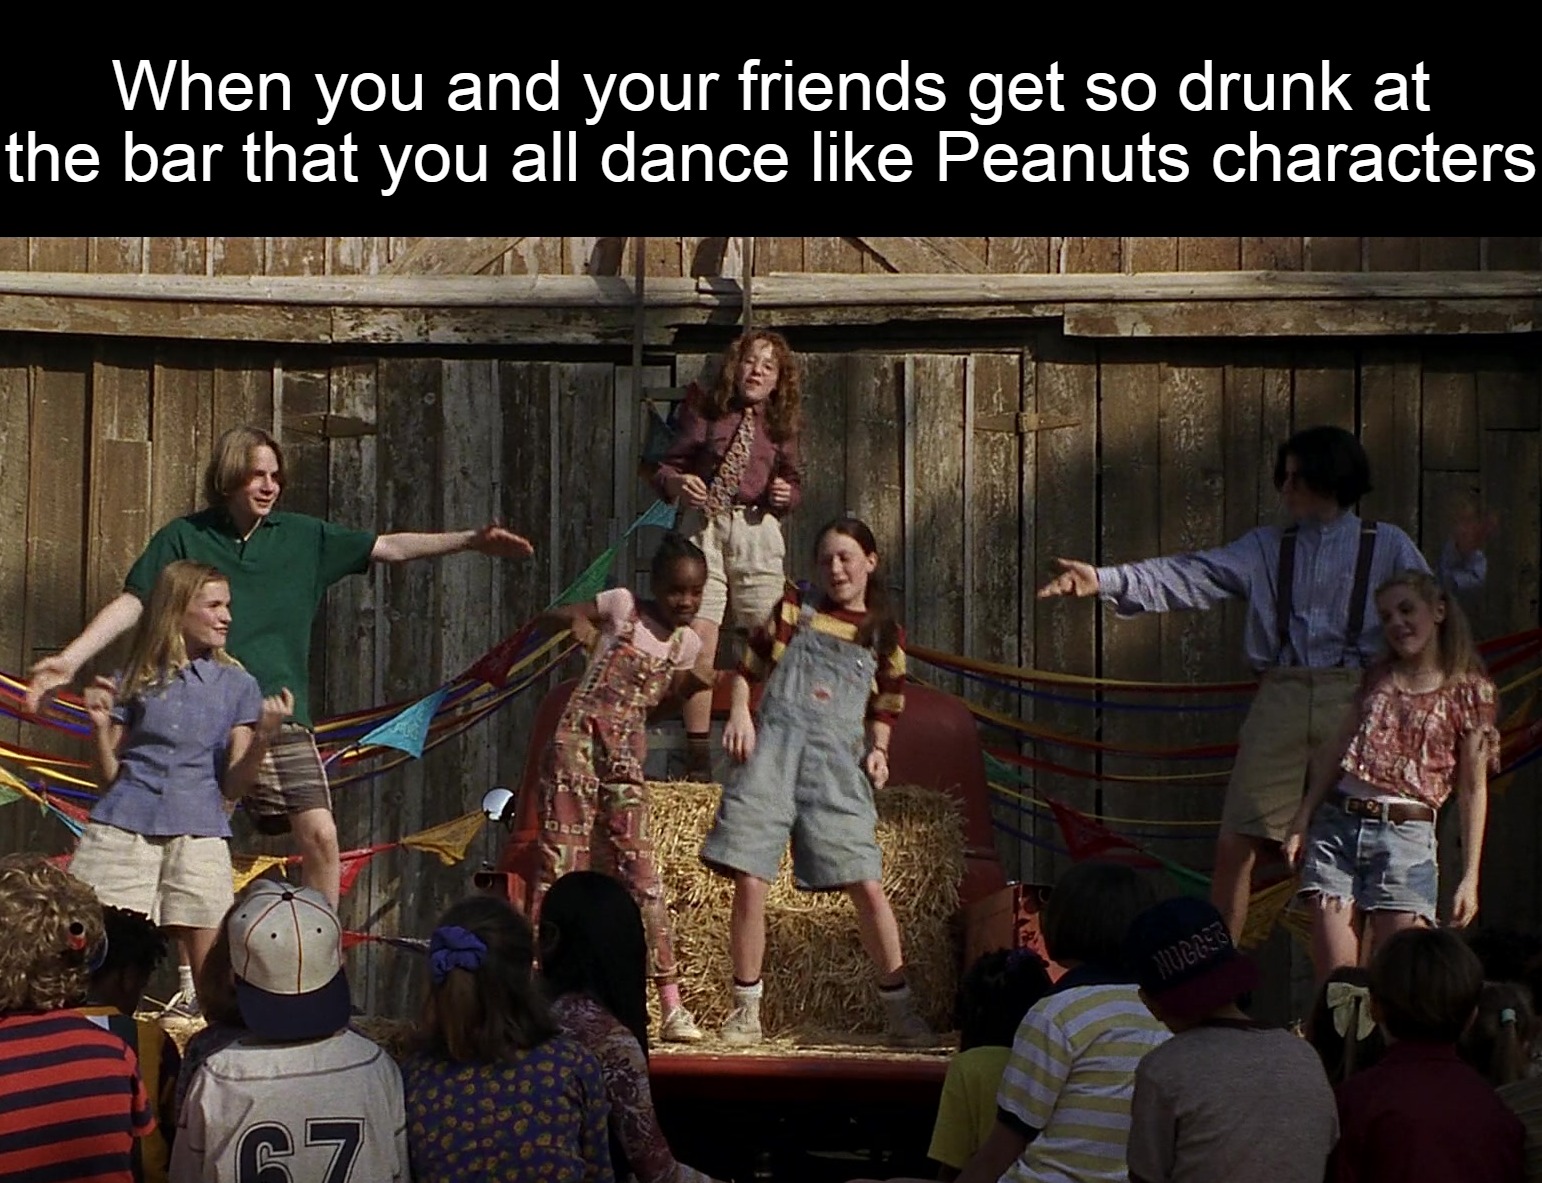 When you and your friends get so drunk at the bar that you all dance like Peanuts characters | image tagged in meme,memes,funny,dank memes | made w/ Imgflip meme maker